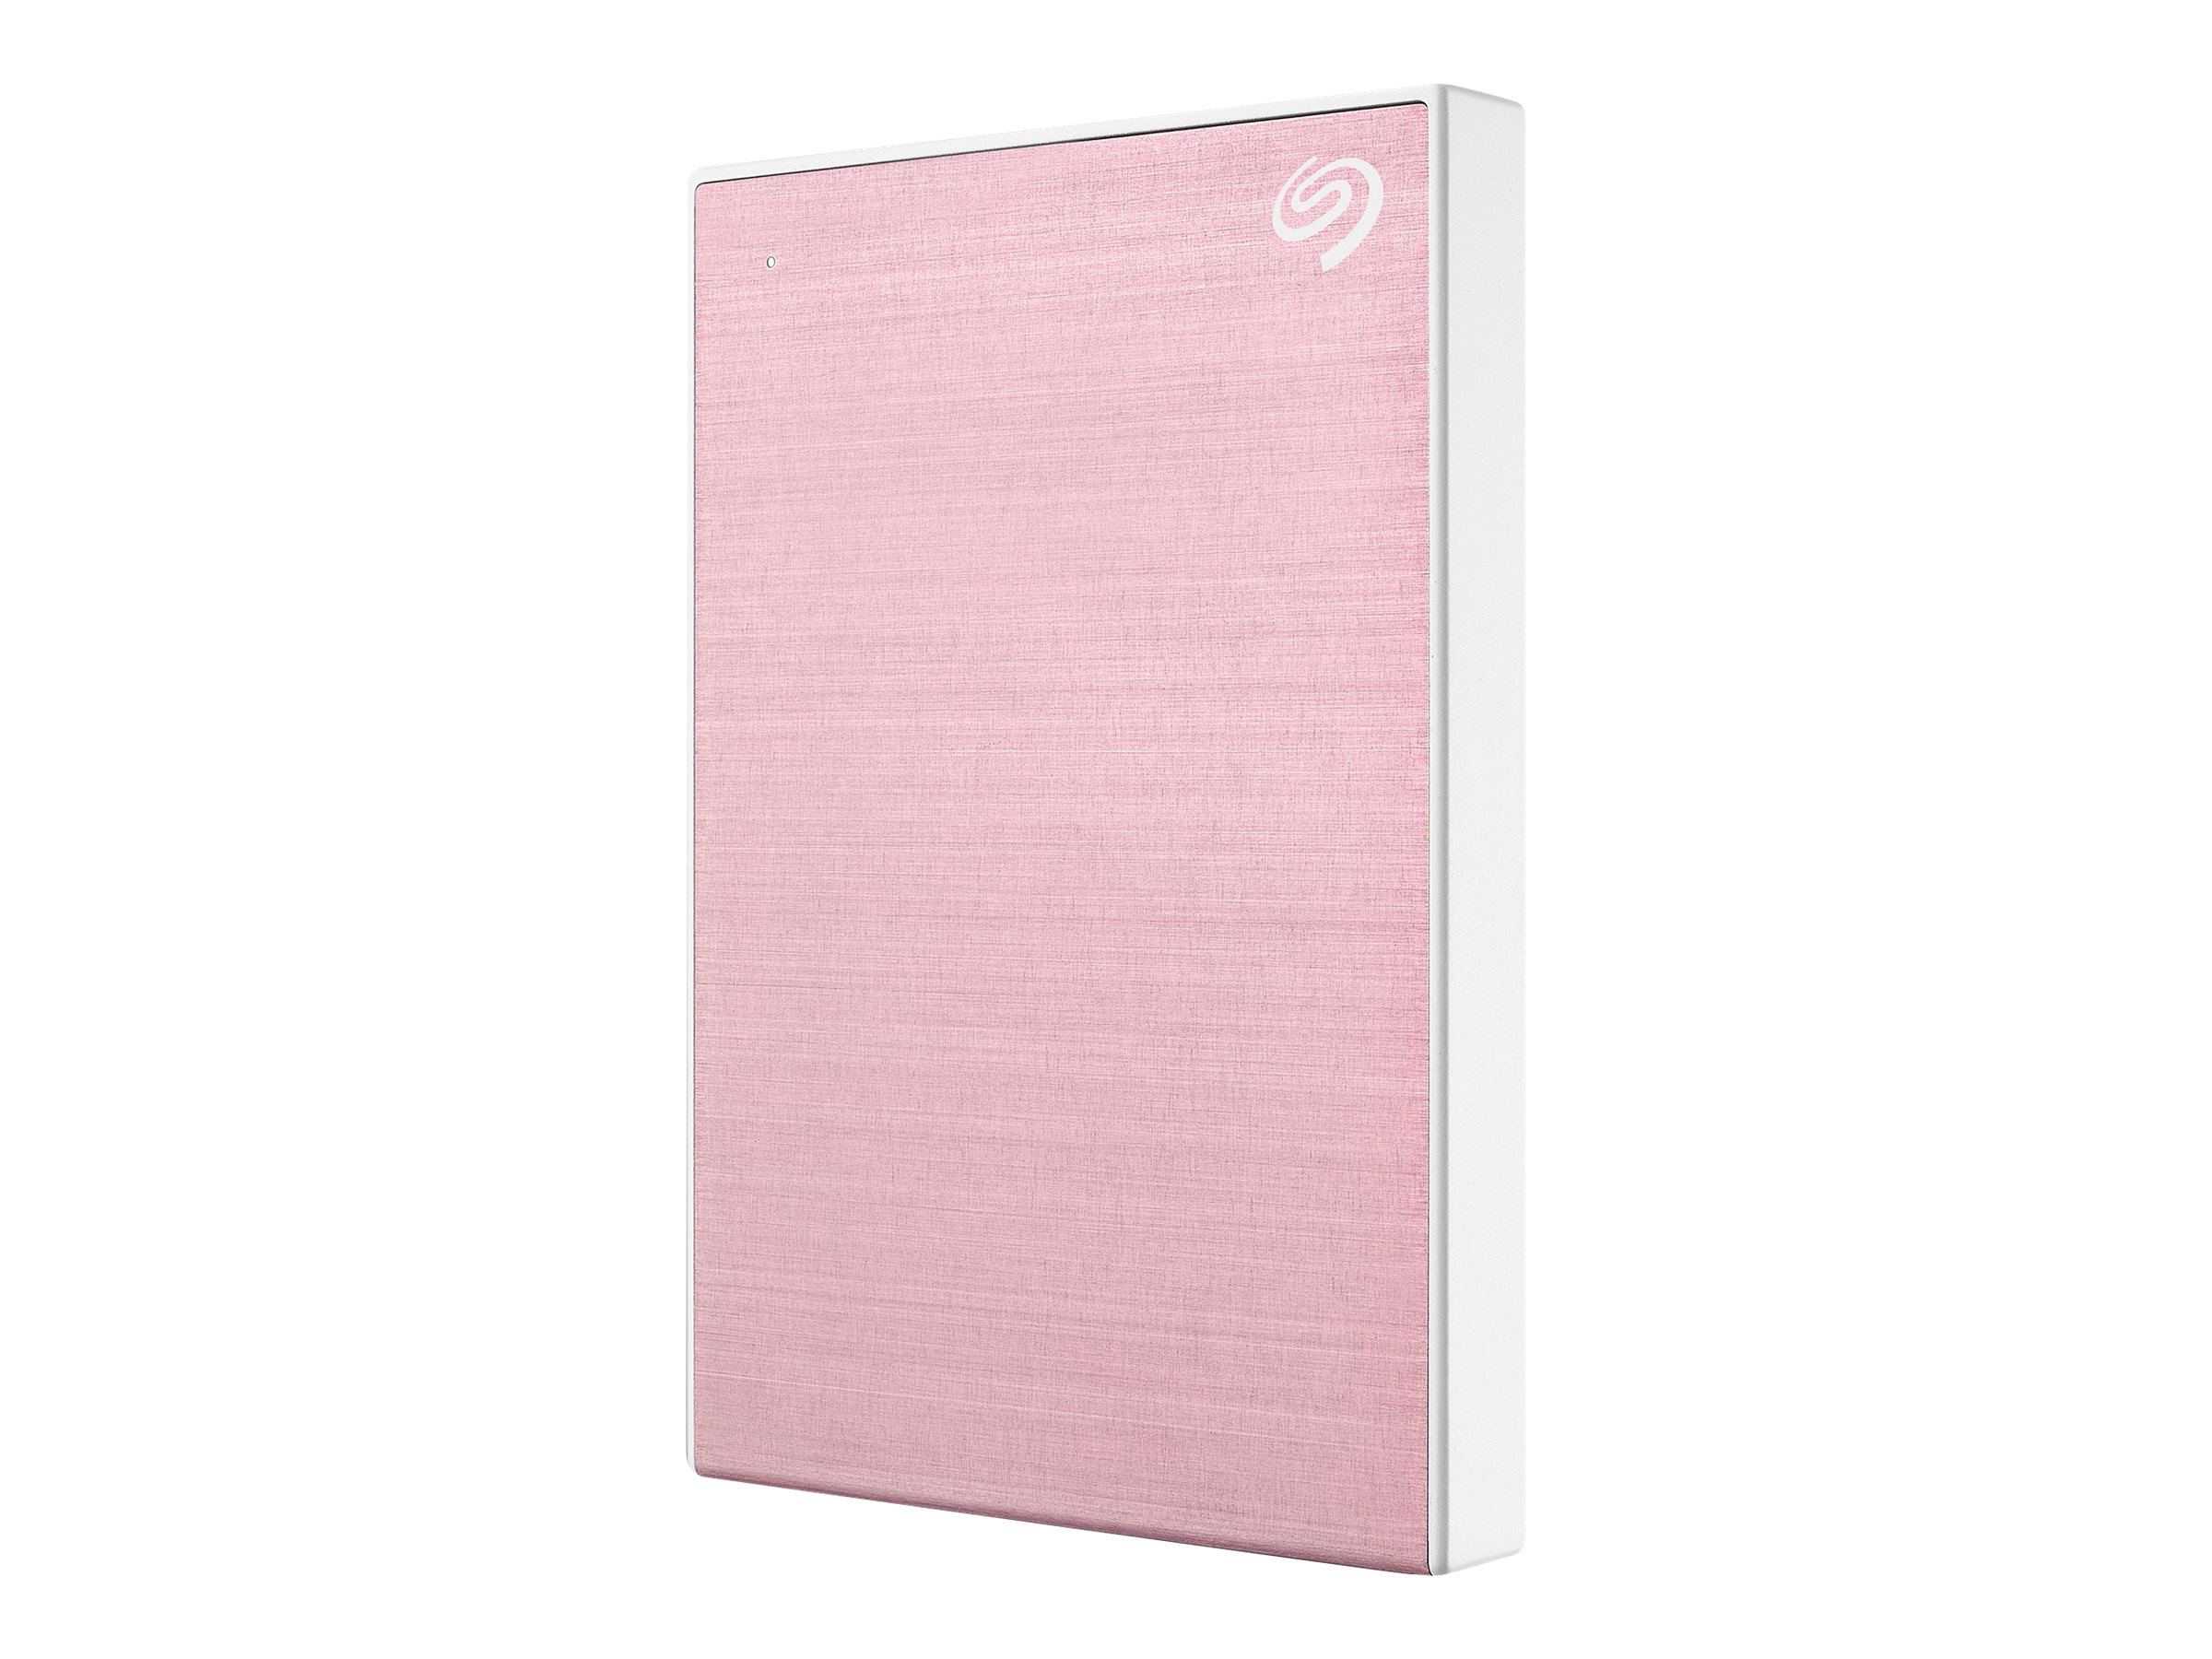 Seagate OneTouchPortable USB3.0 2TB rose gold